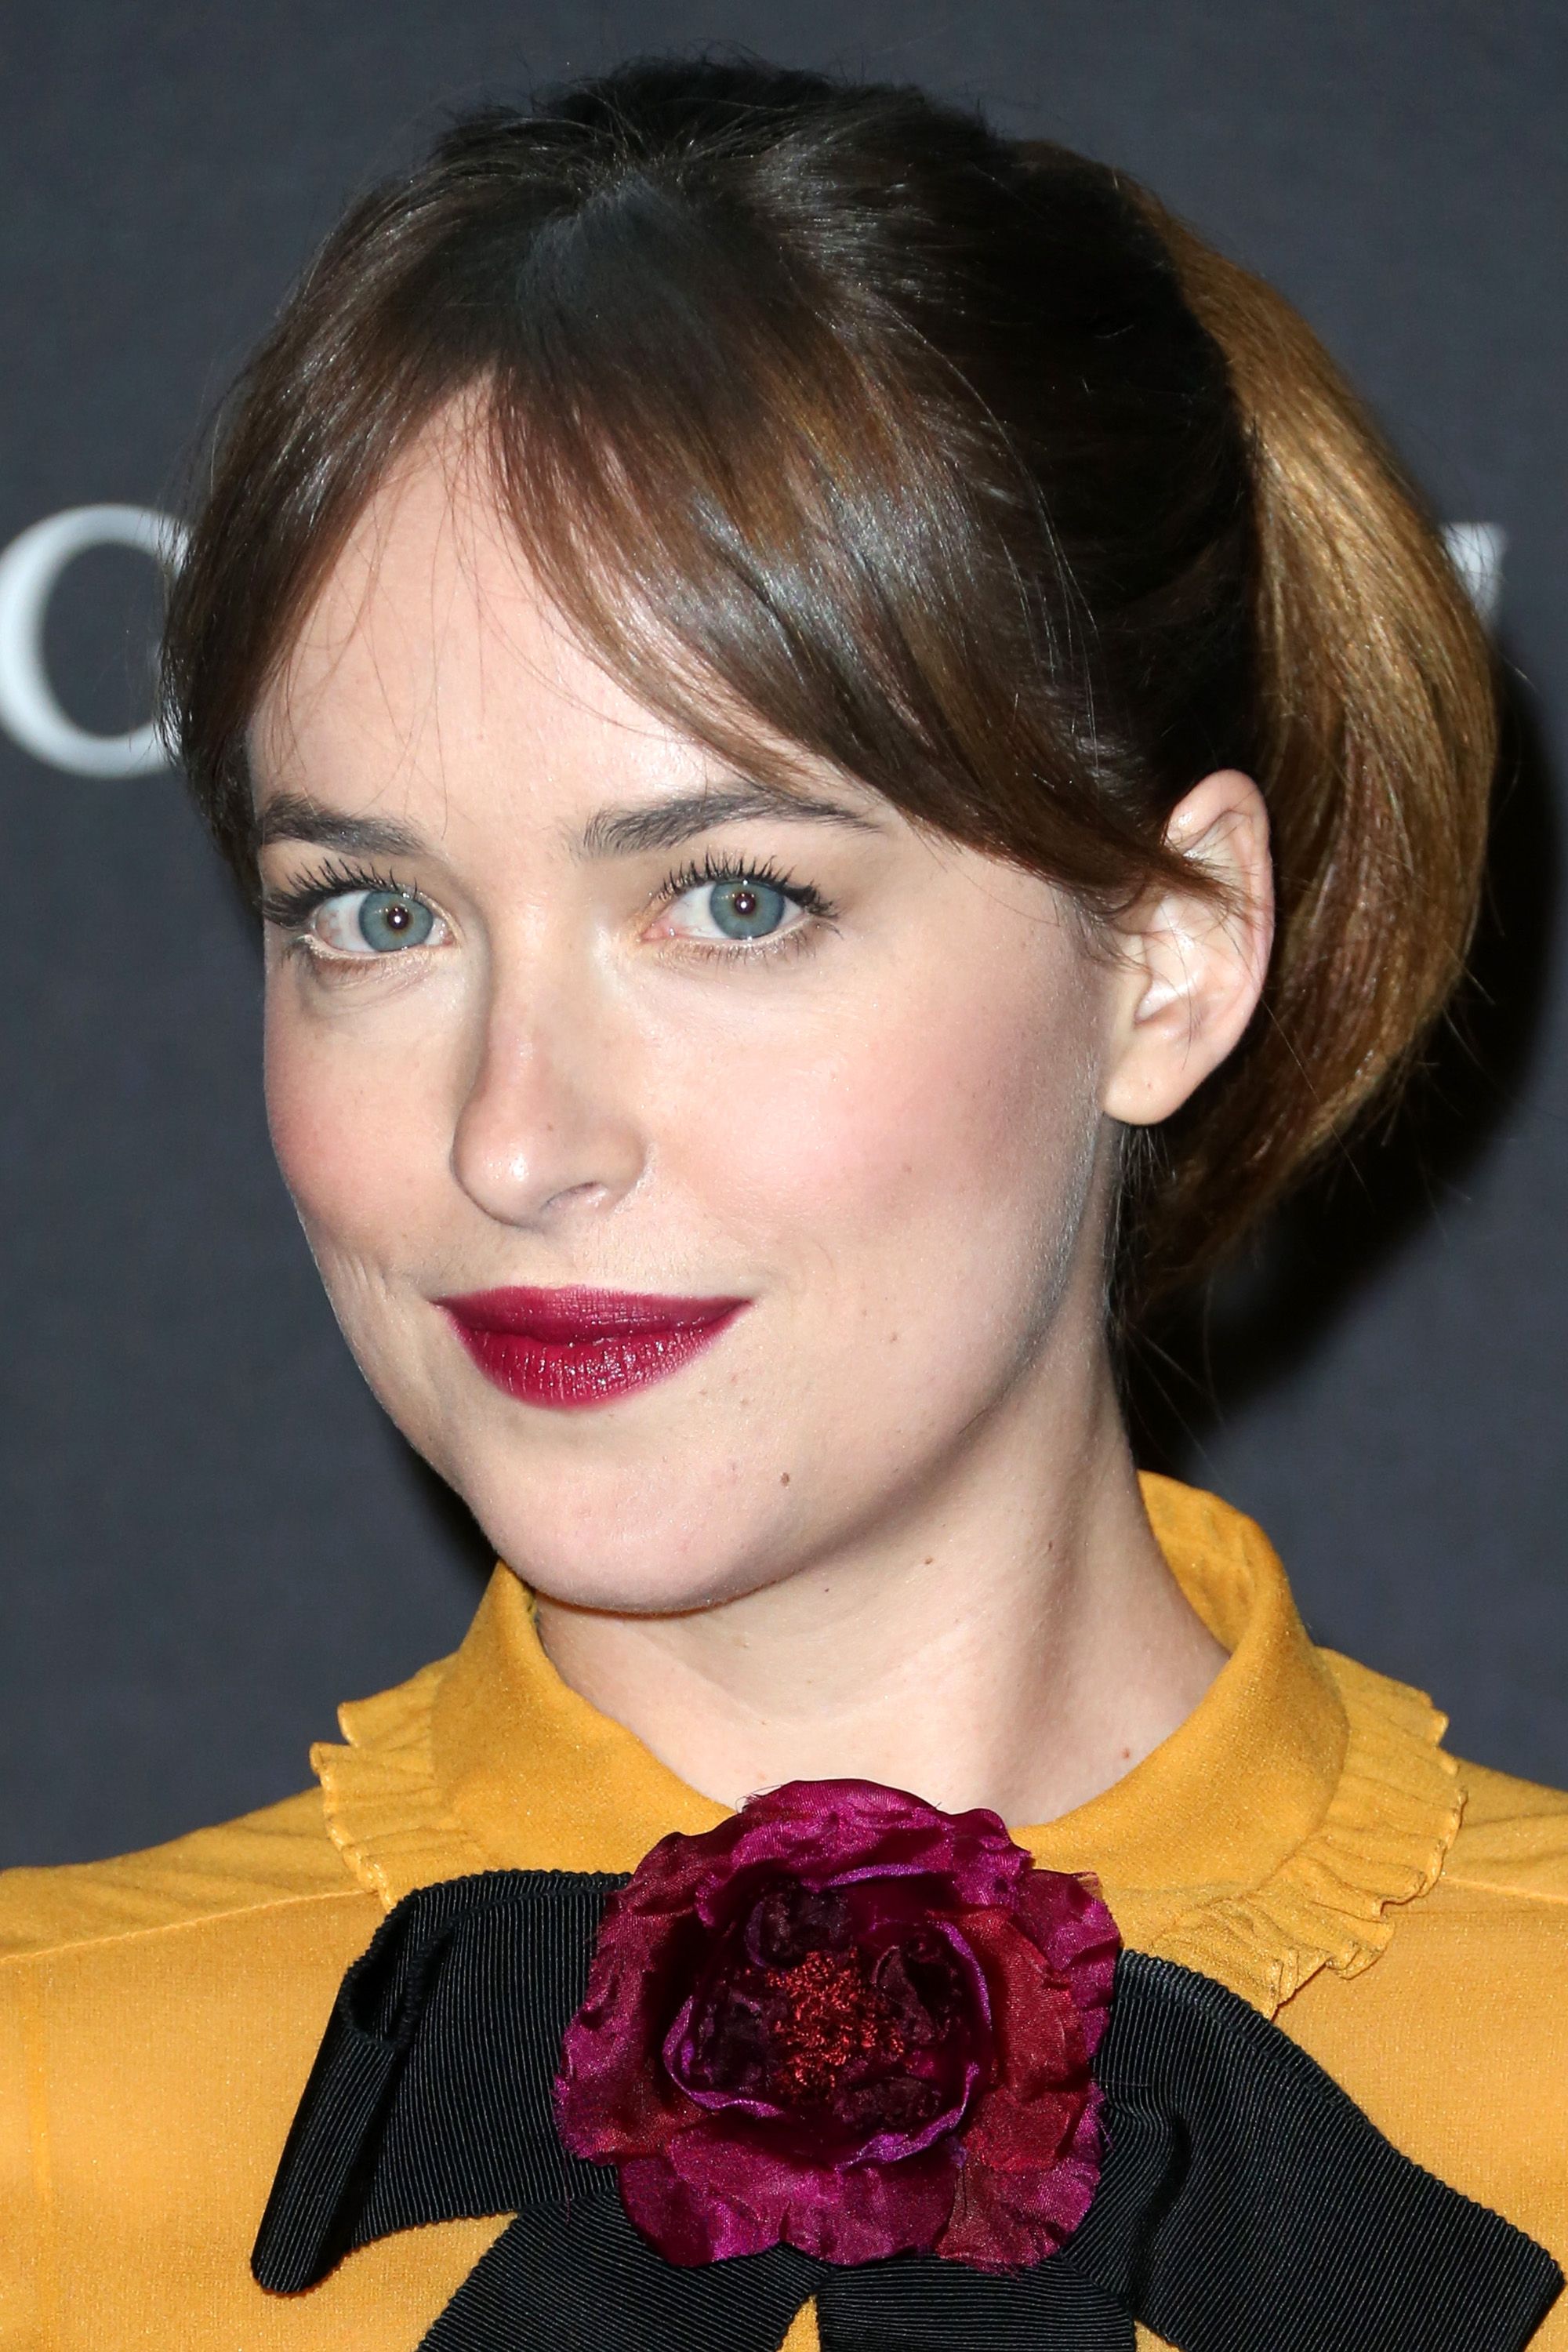 Dakota Johnson's Inspired Hairstyles To Copy If You Have Bangs